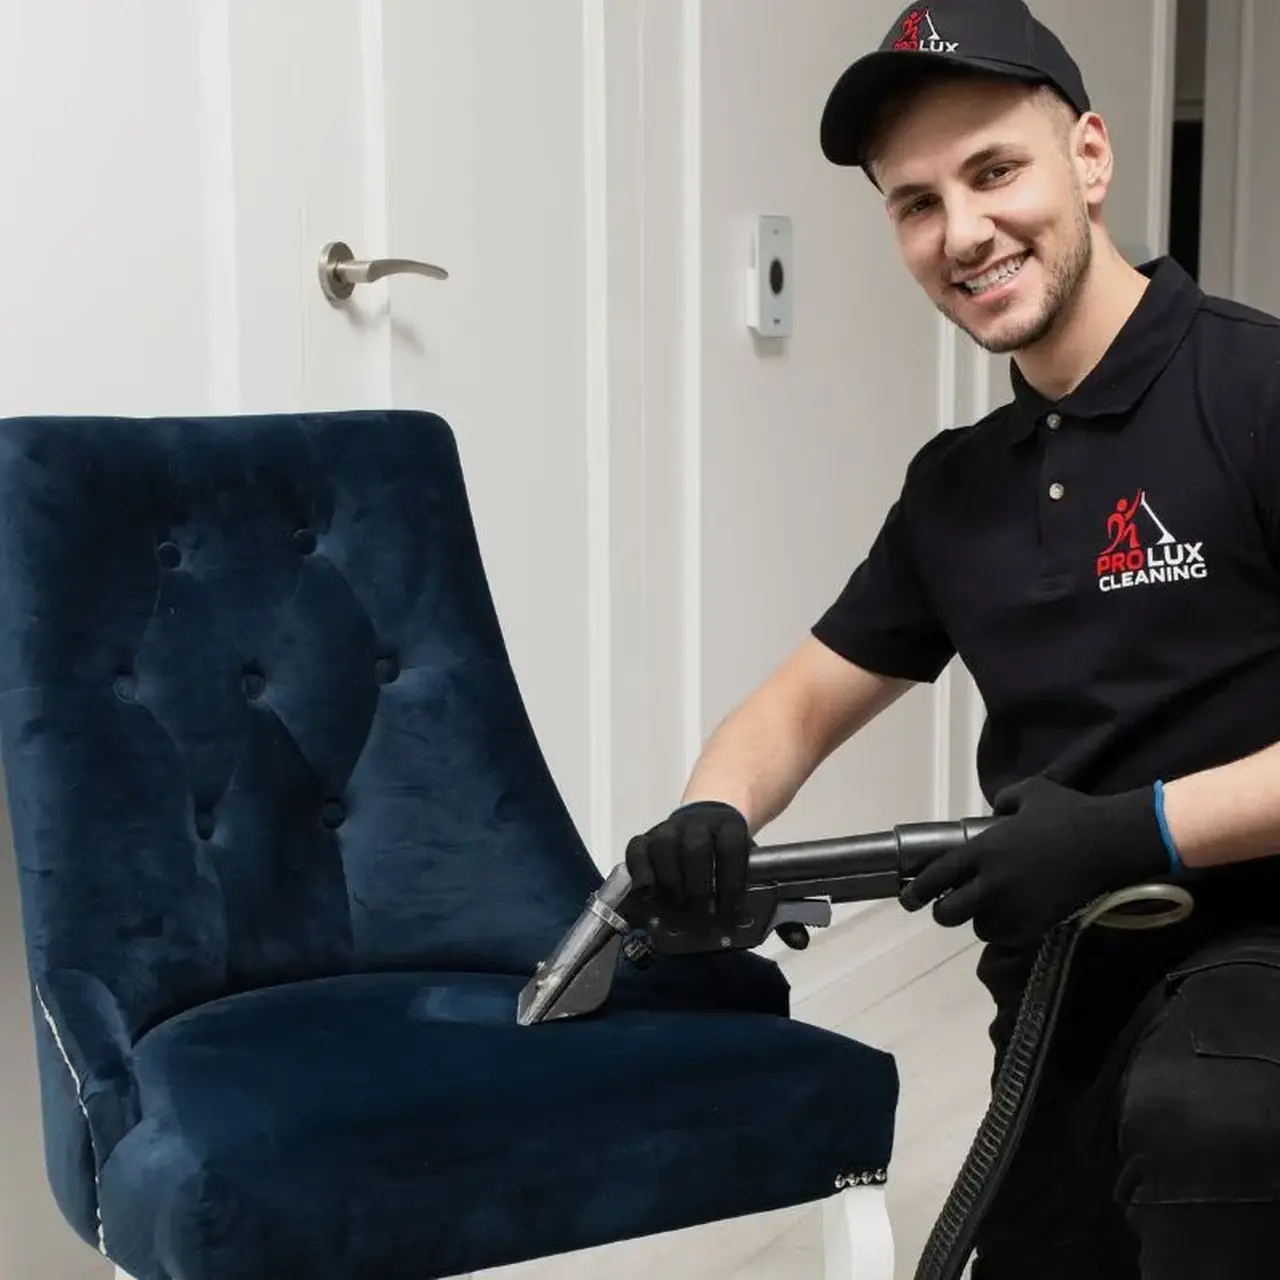 Upholstery Cleaners - Techician Stratford